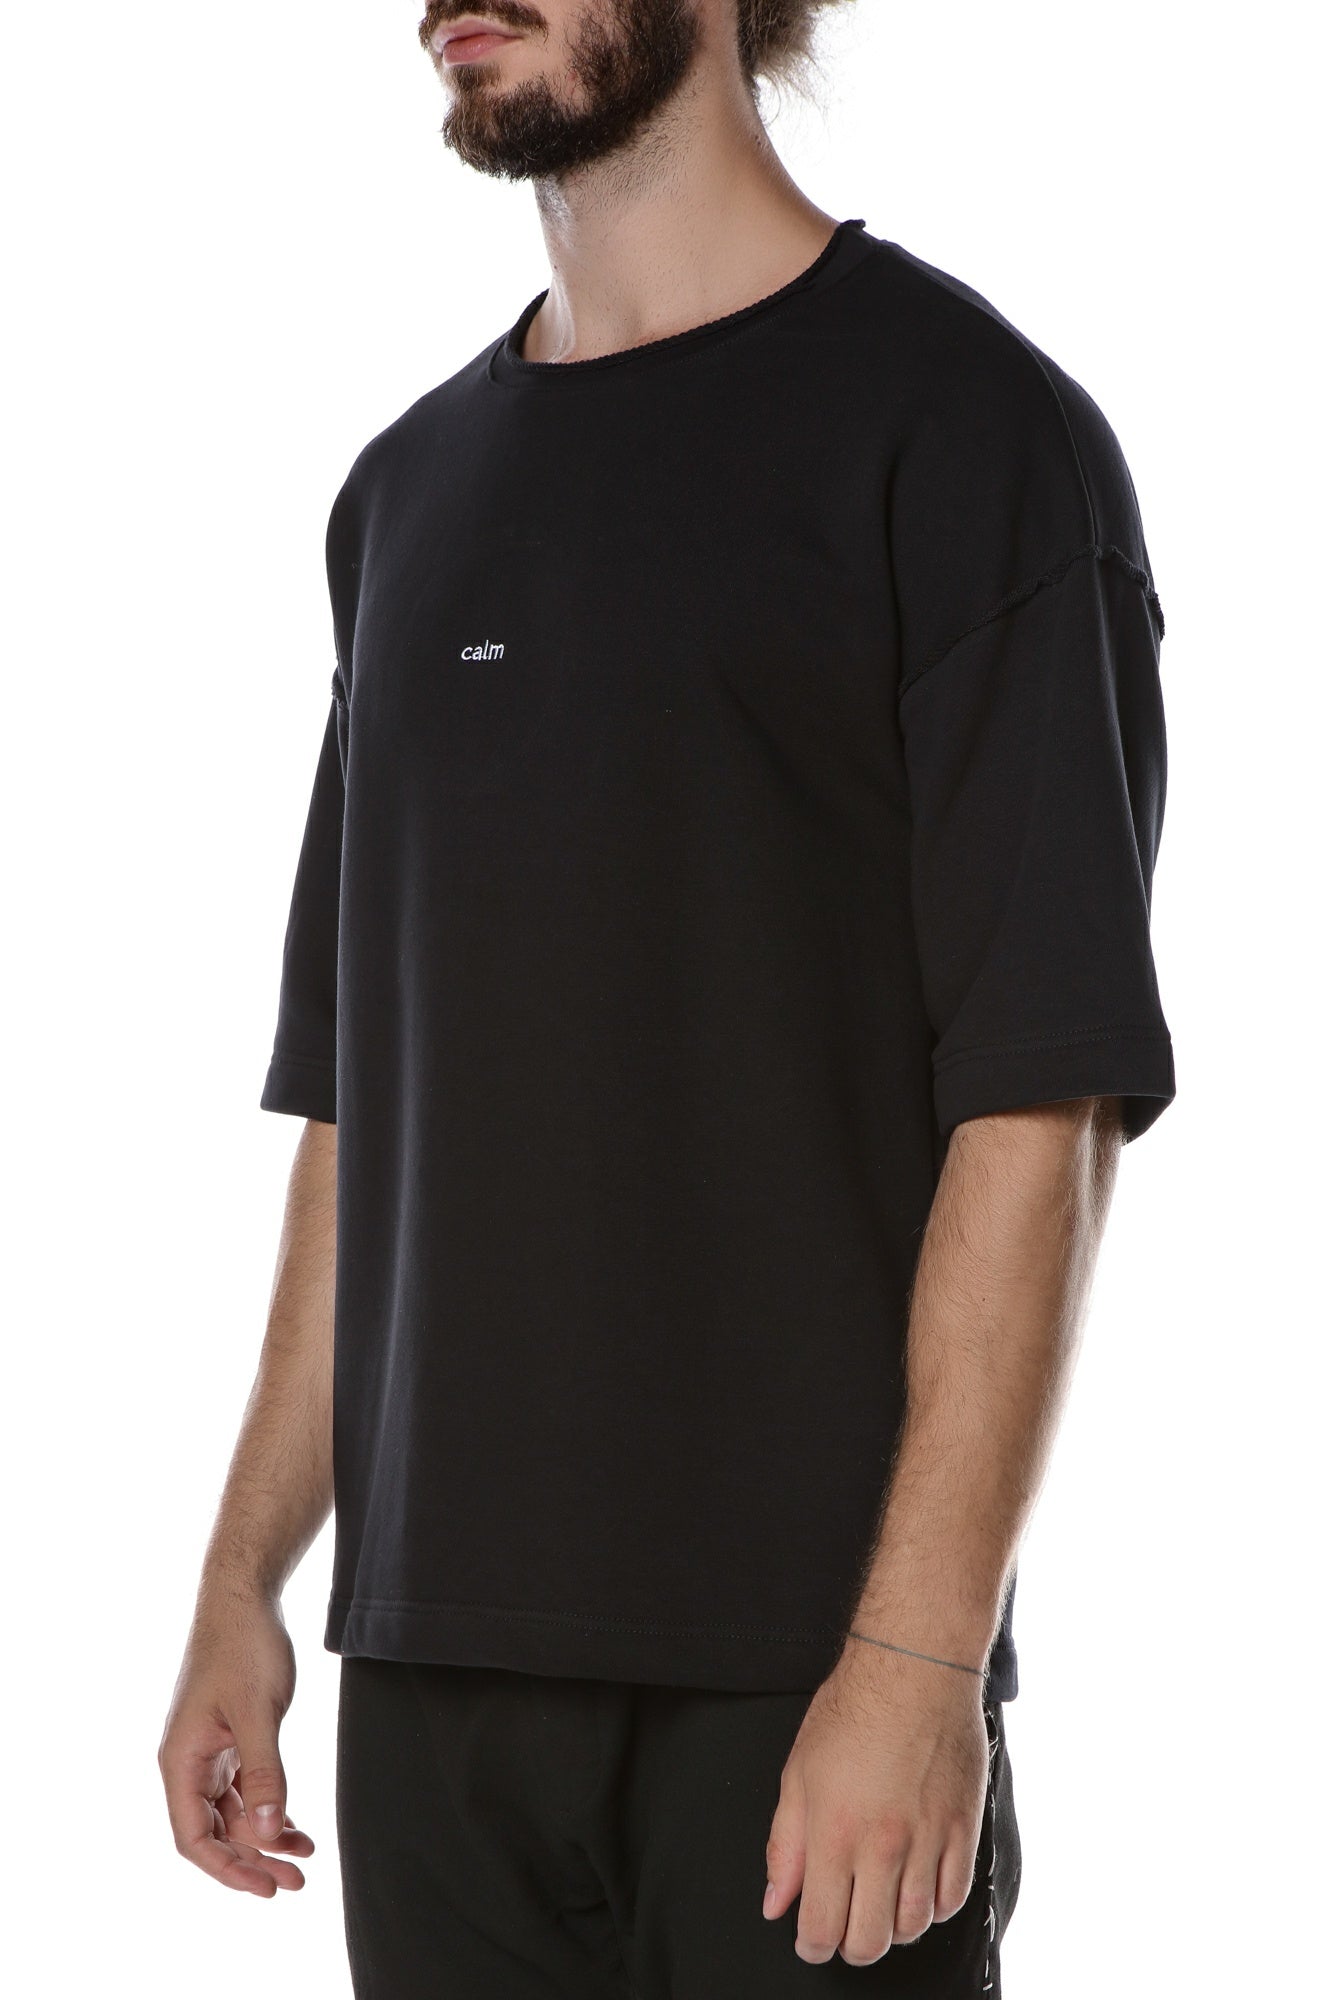 CALM embroidered BLACK T-shirt